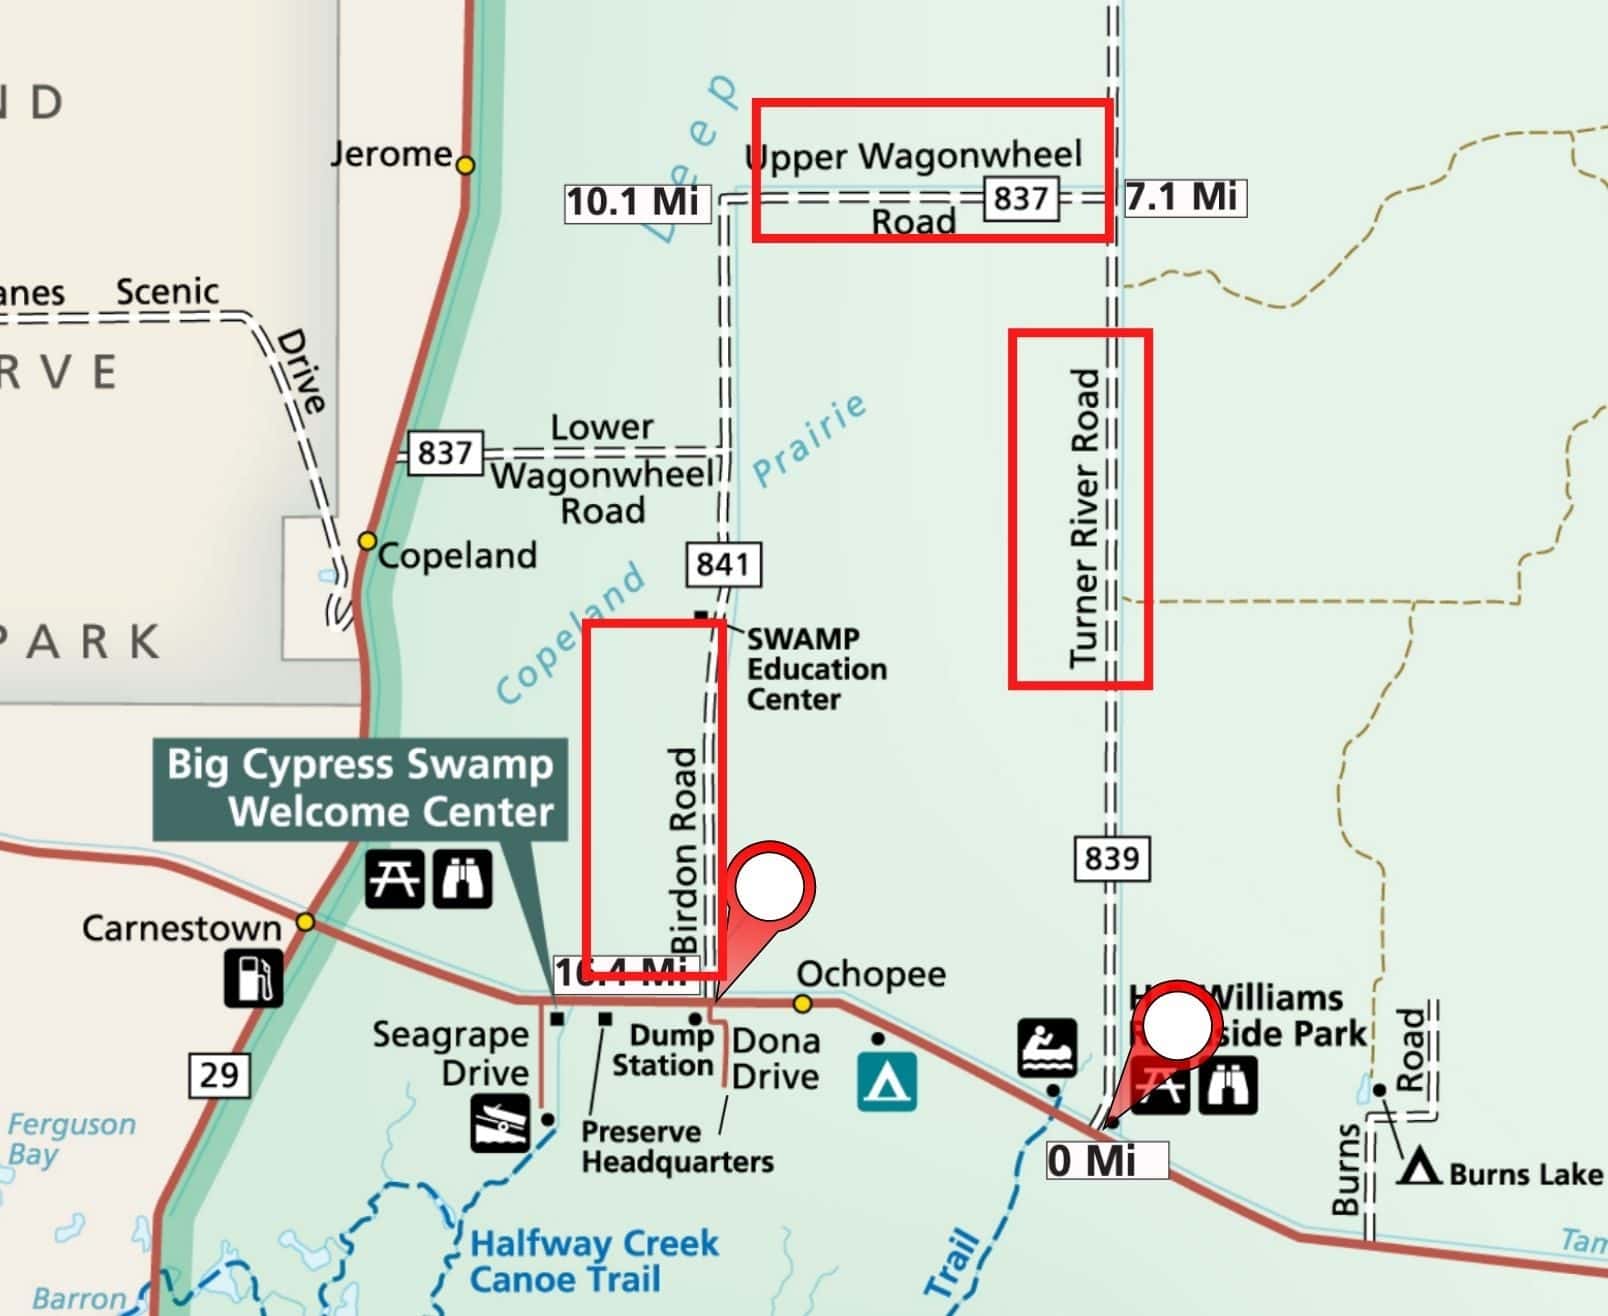 Map of Scenic Drives in Big Cypress National Preserve